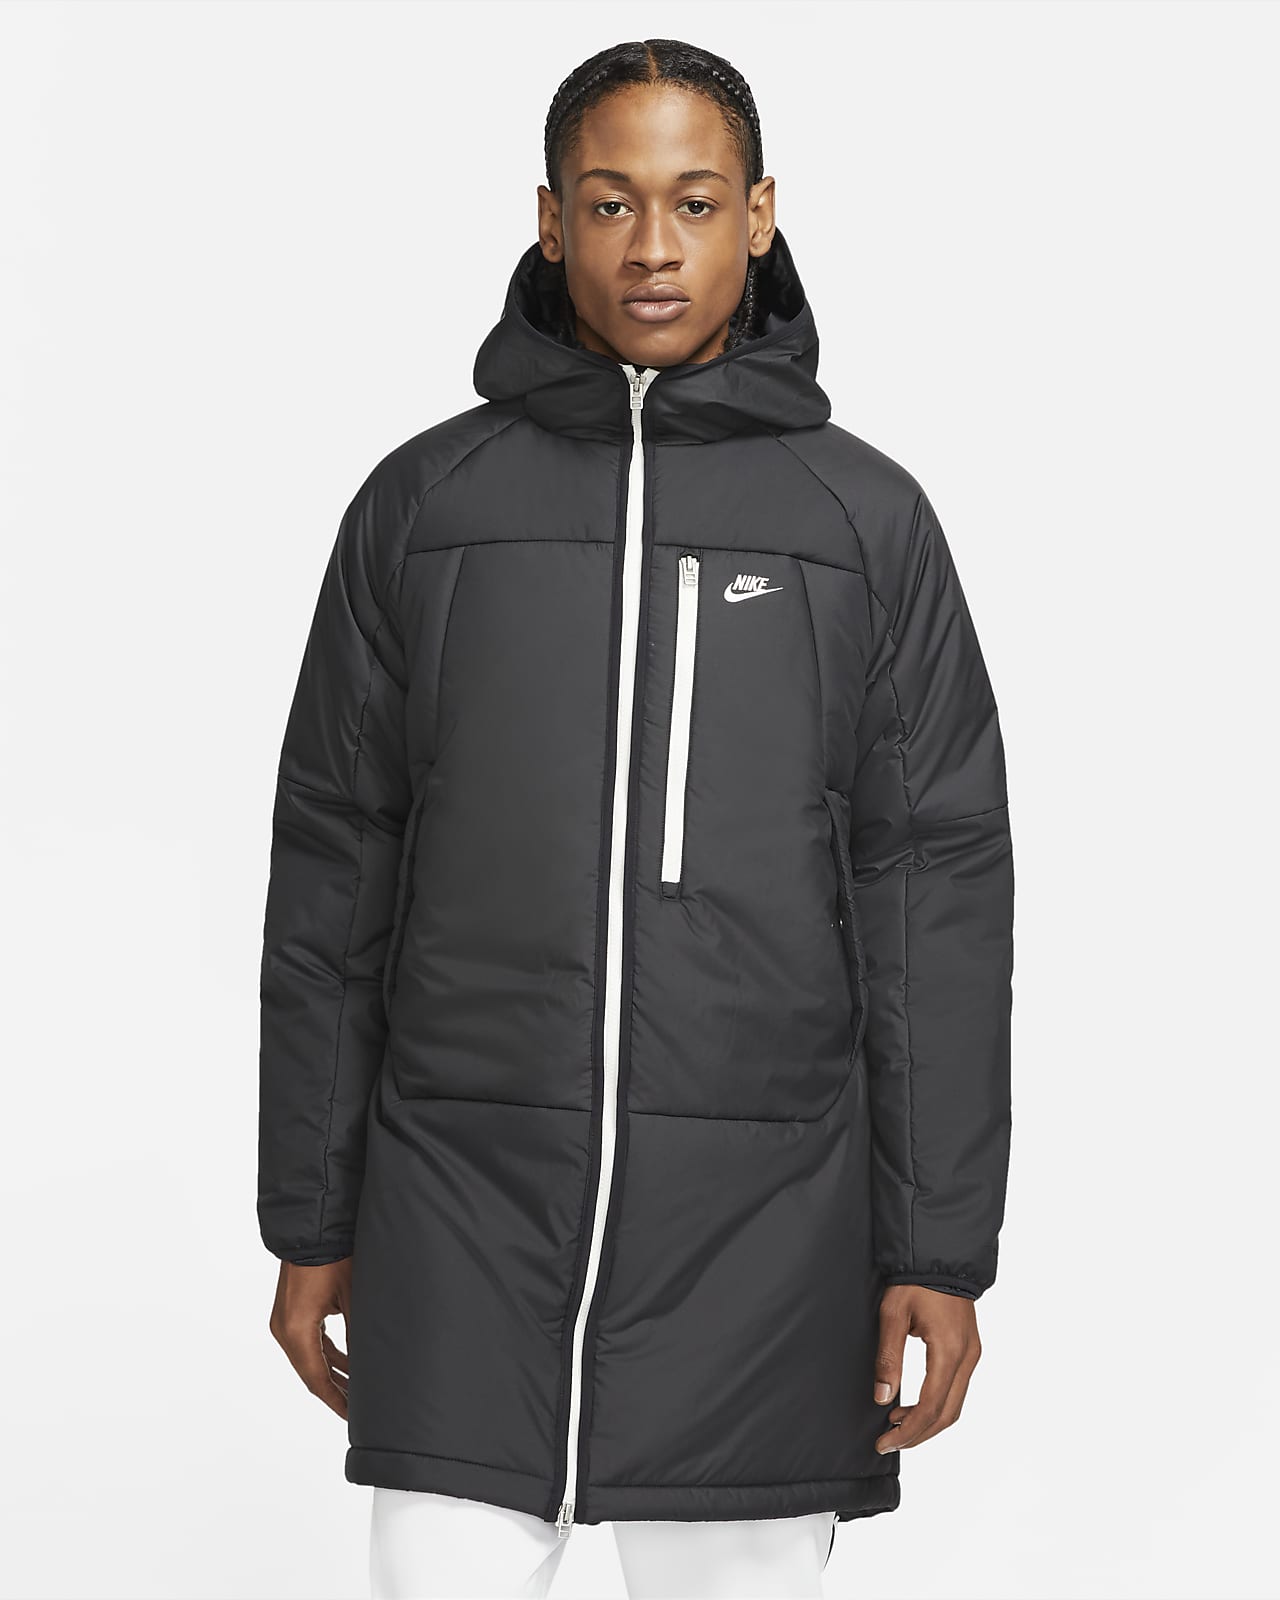 Nike Sportswear Therma-FIT Legacy Parca - Home